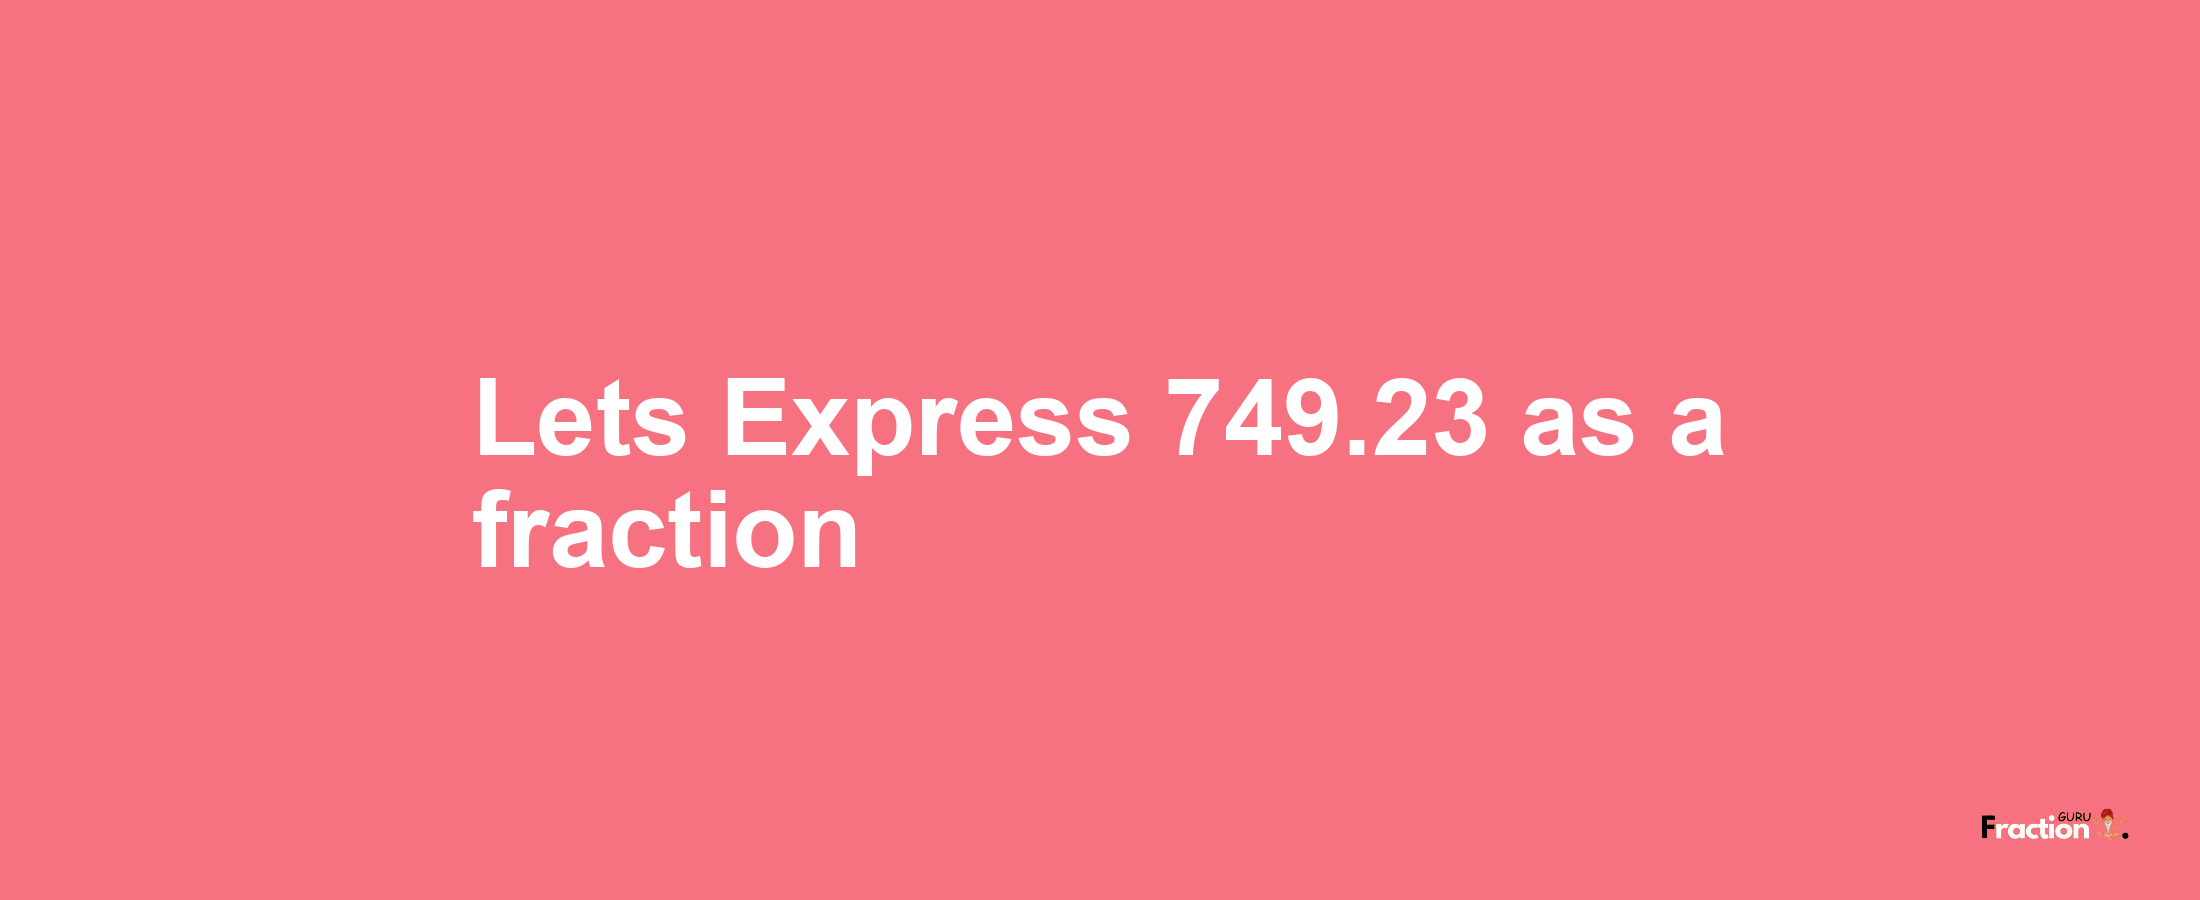 Lets Express 749.23 as afraction